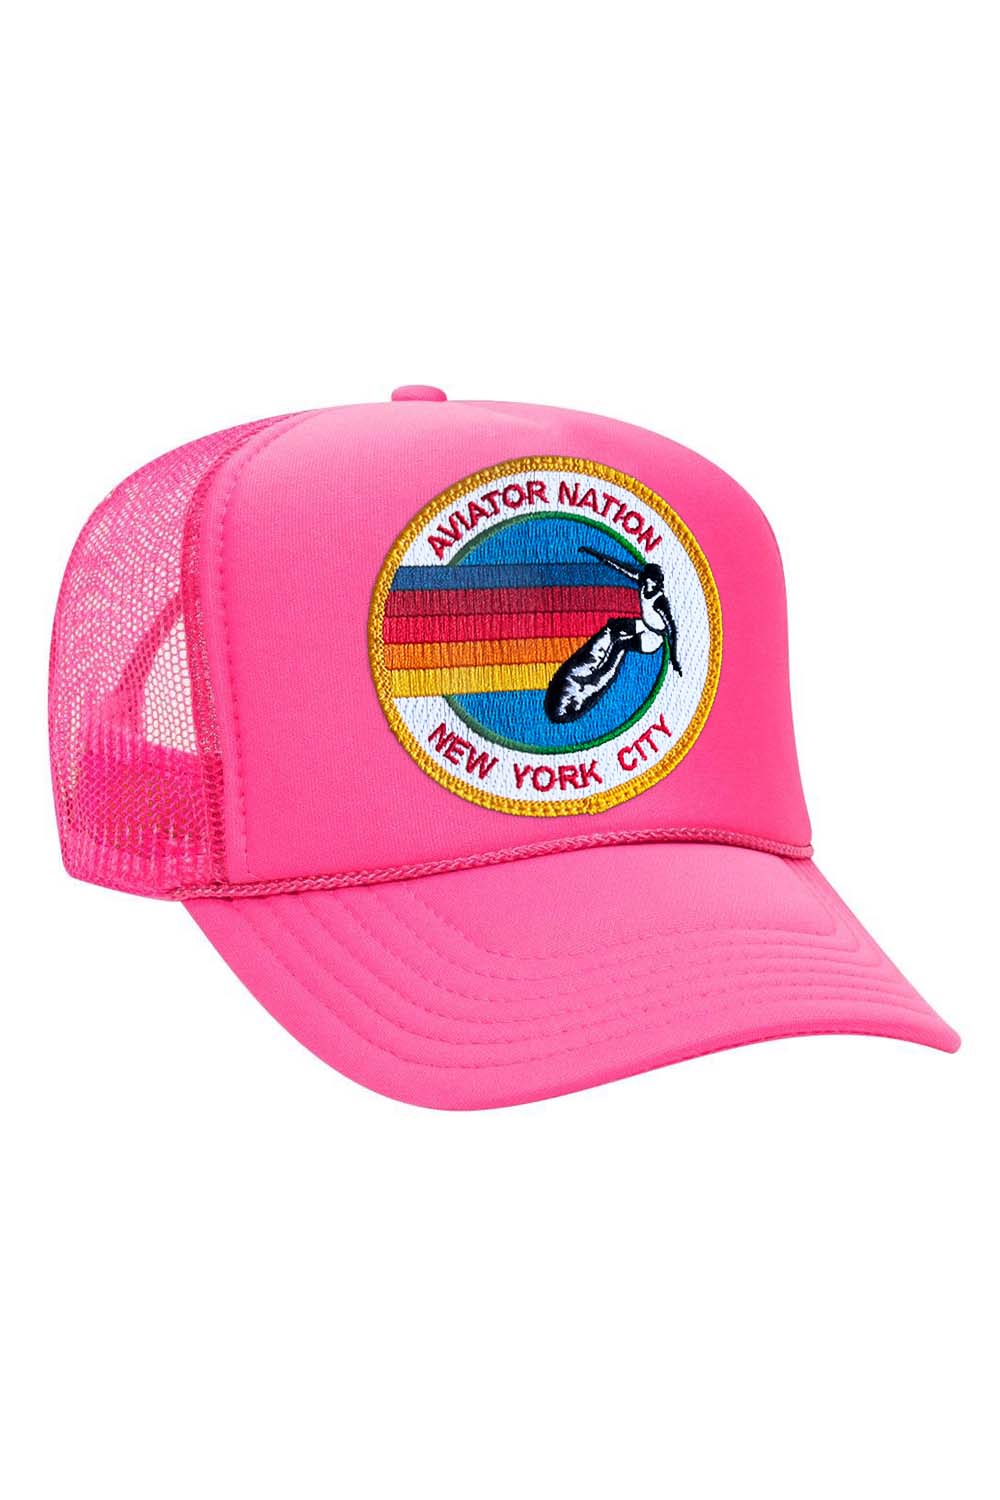 SIGNATURE NEW YORK CITY - VINTAGE LOW RISE TRUCKER HATS Aviator Nation NEON PINK 